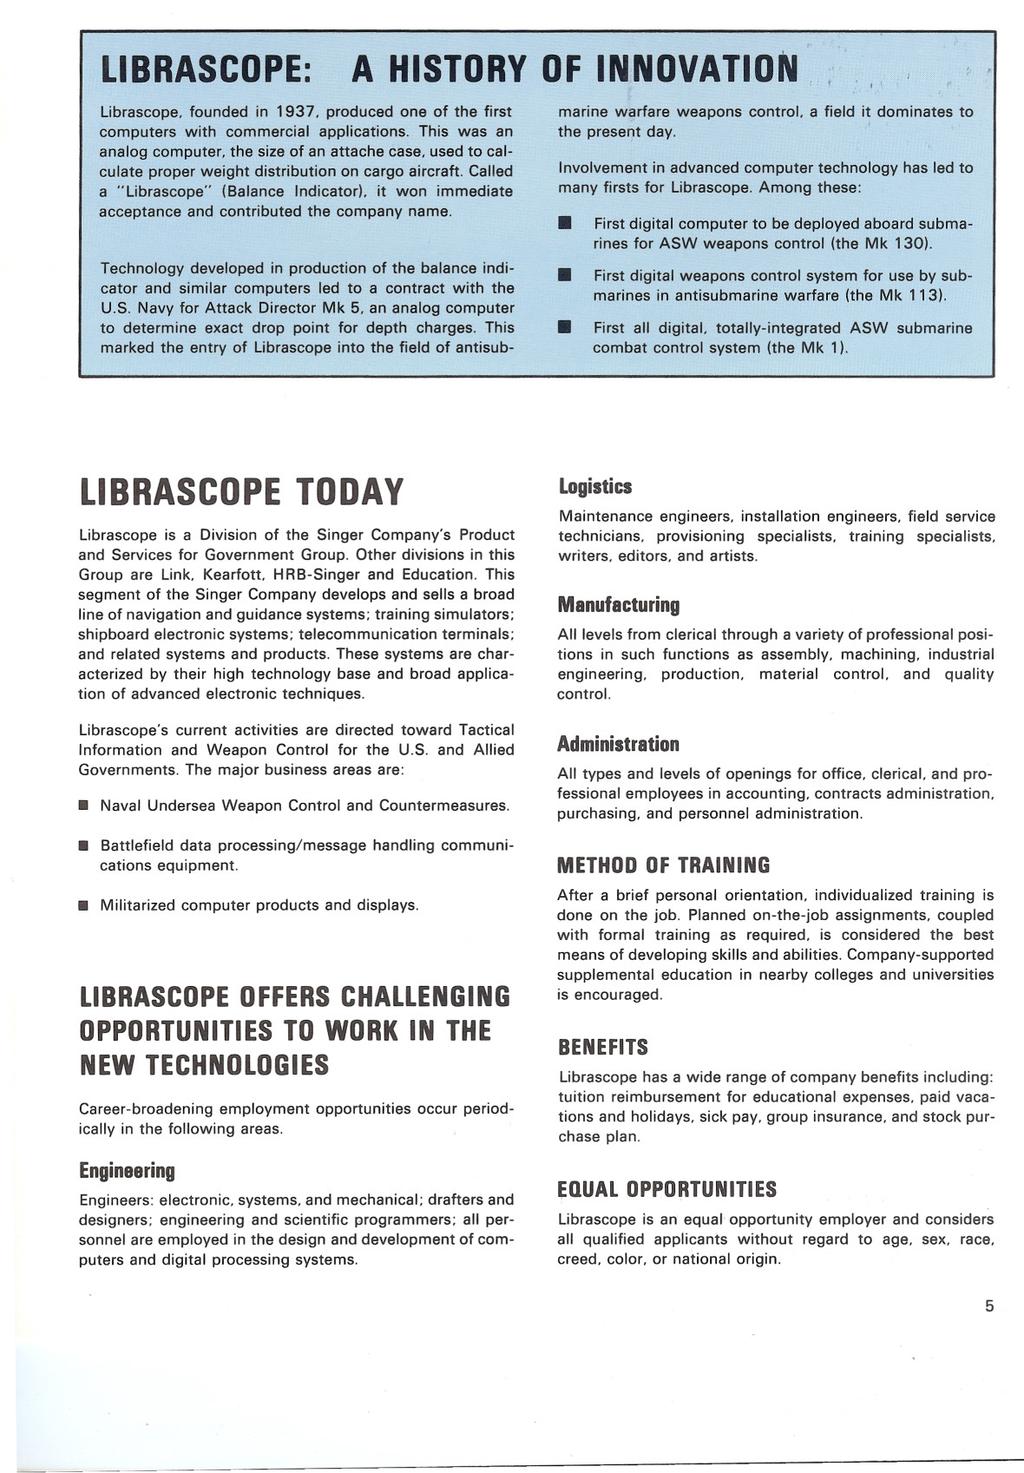 LIBRASCOPE: A HISTORY OF INNOVATION,, Librascope, founded in 1937, produced one of the first computers with commercial applications, This was an analog computer, the size of an attache case, used to